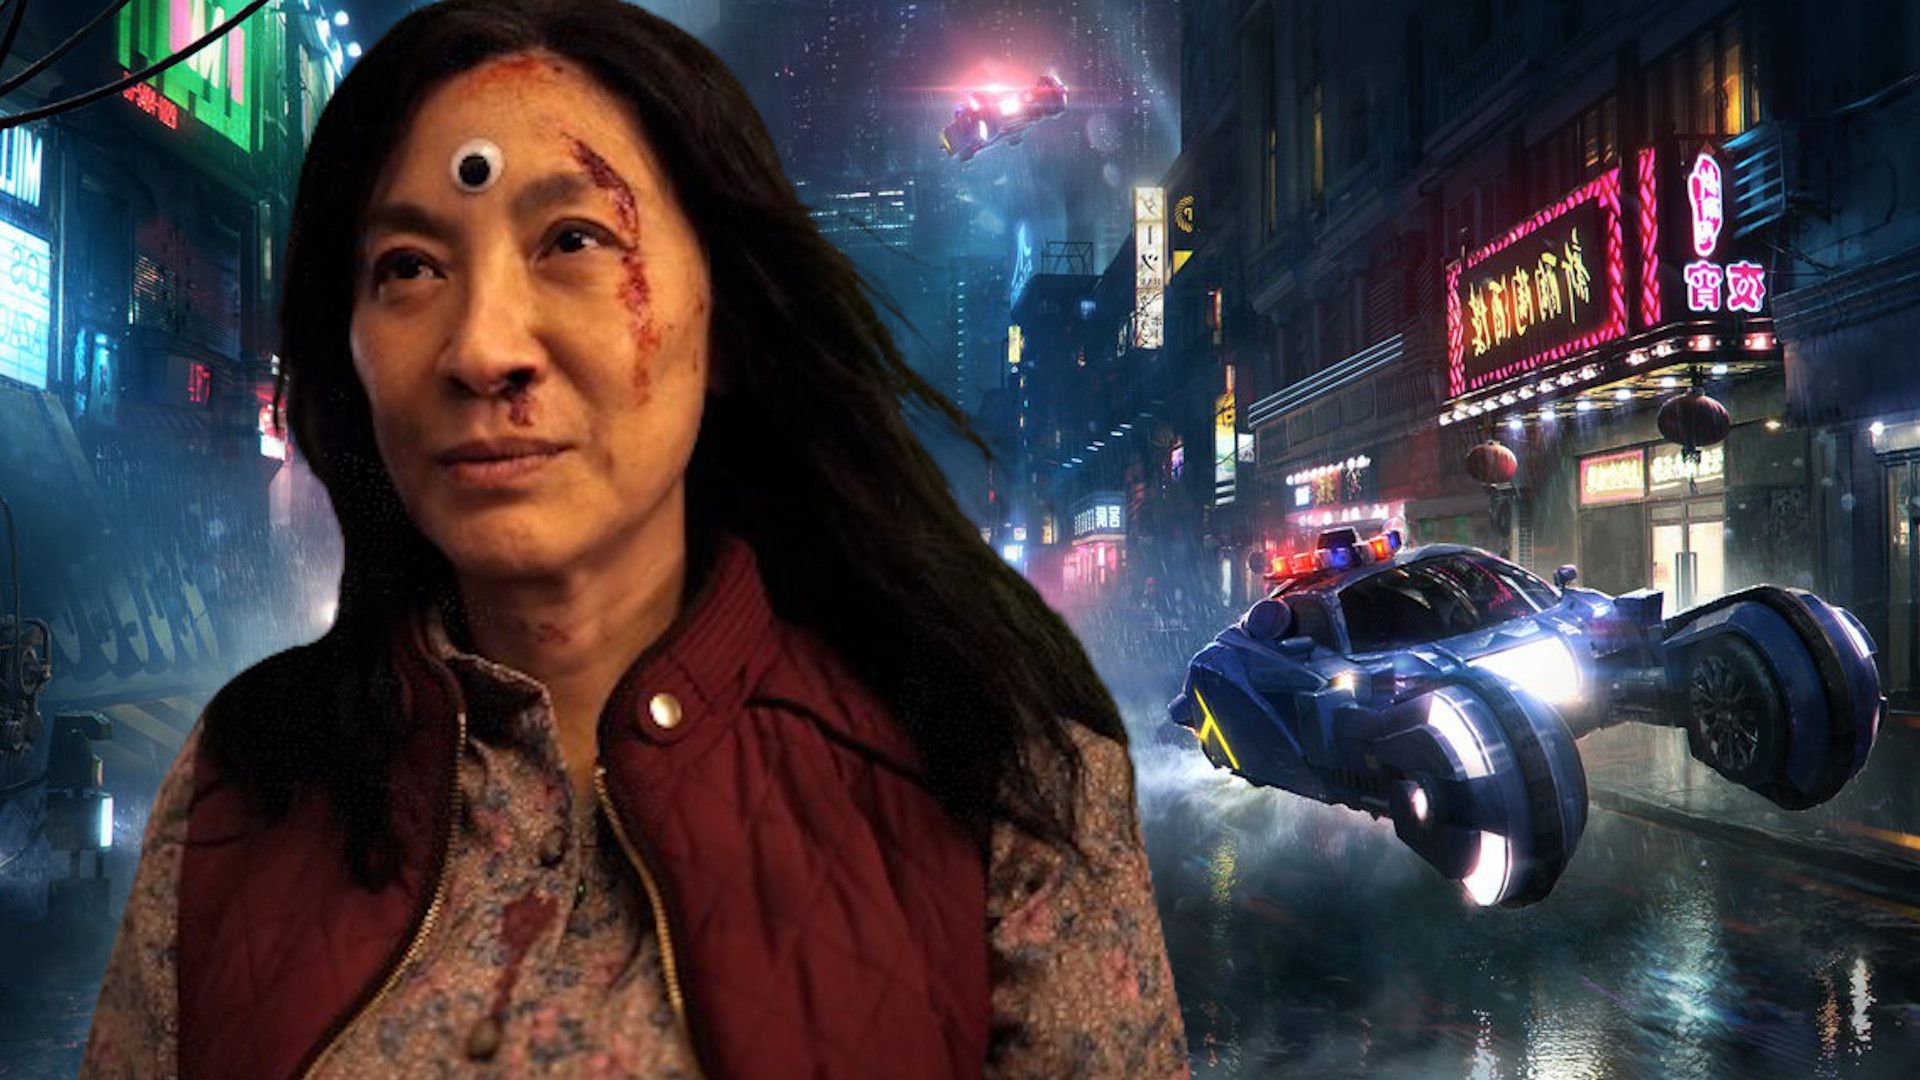 Michelle Yeoh in Everything Everywhere All at Once over an image from Blade Runner 2049